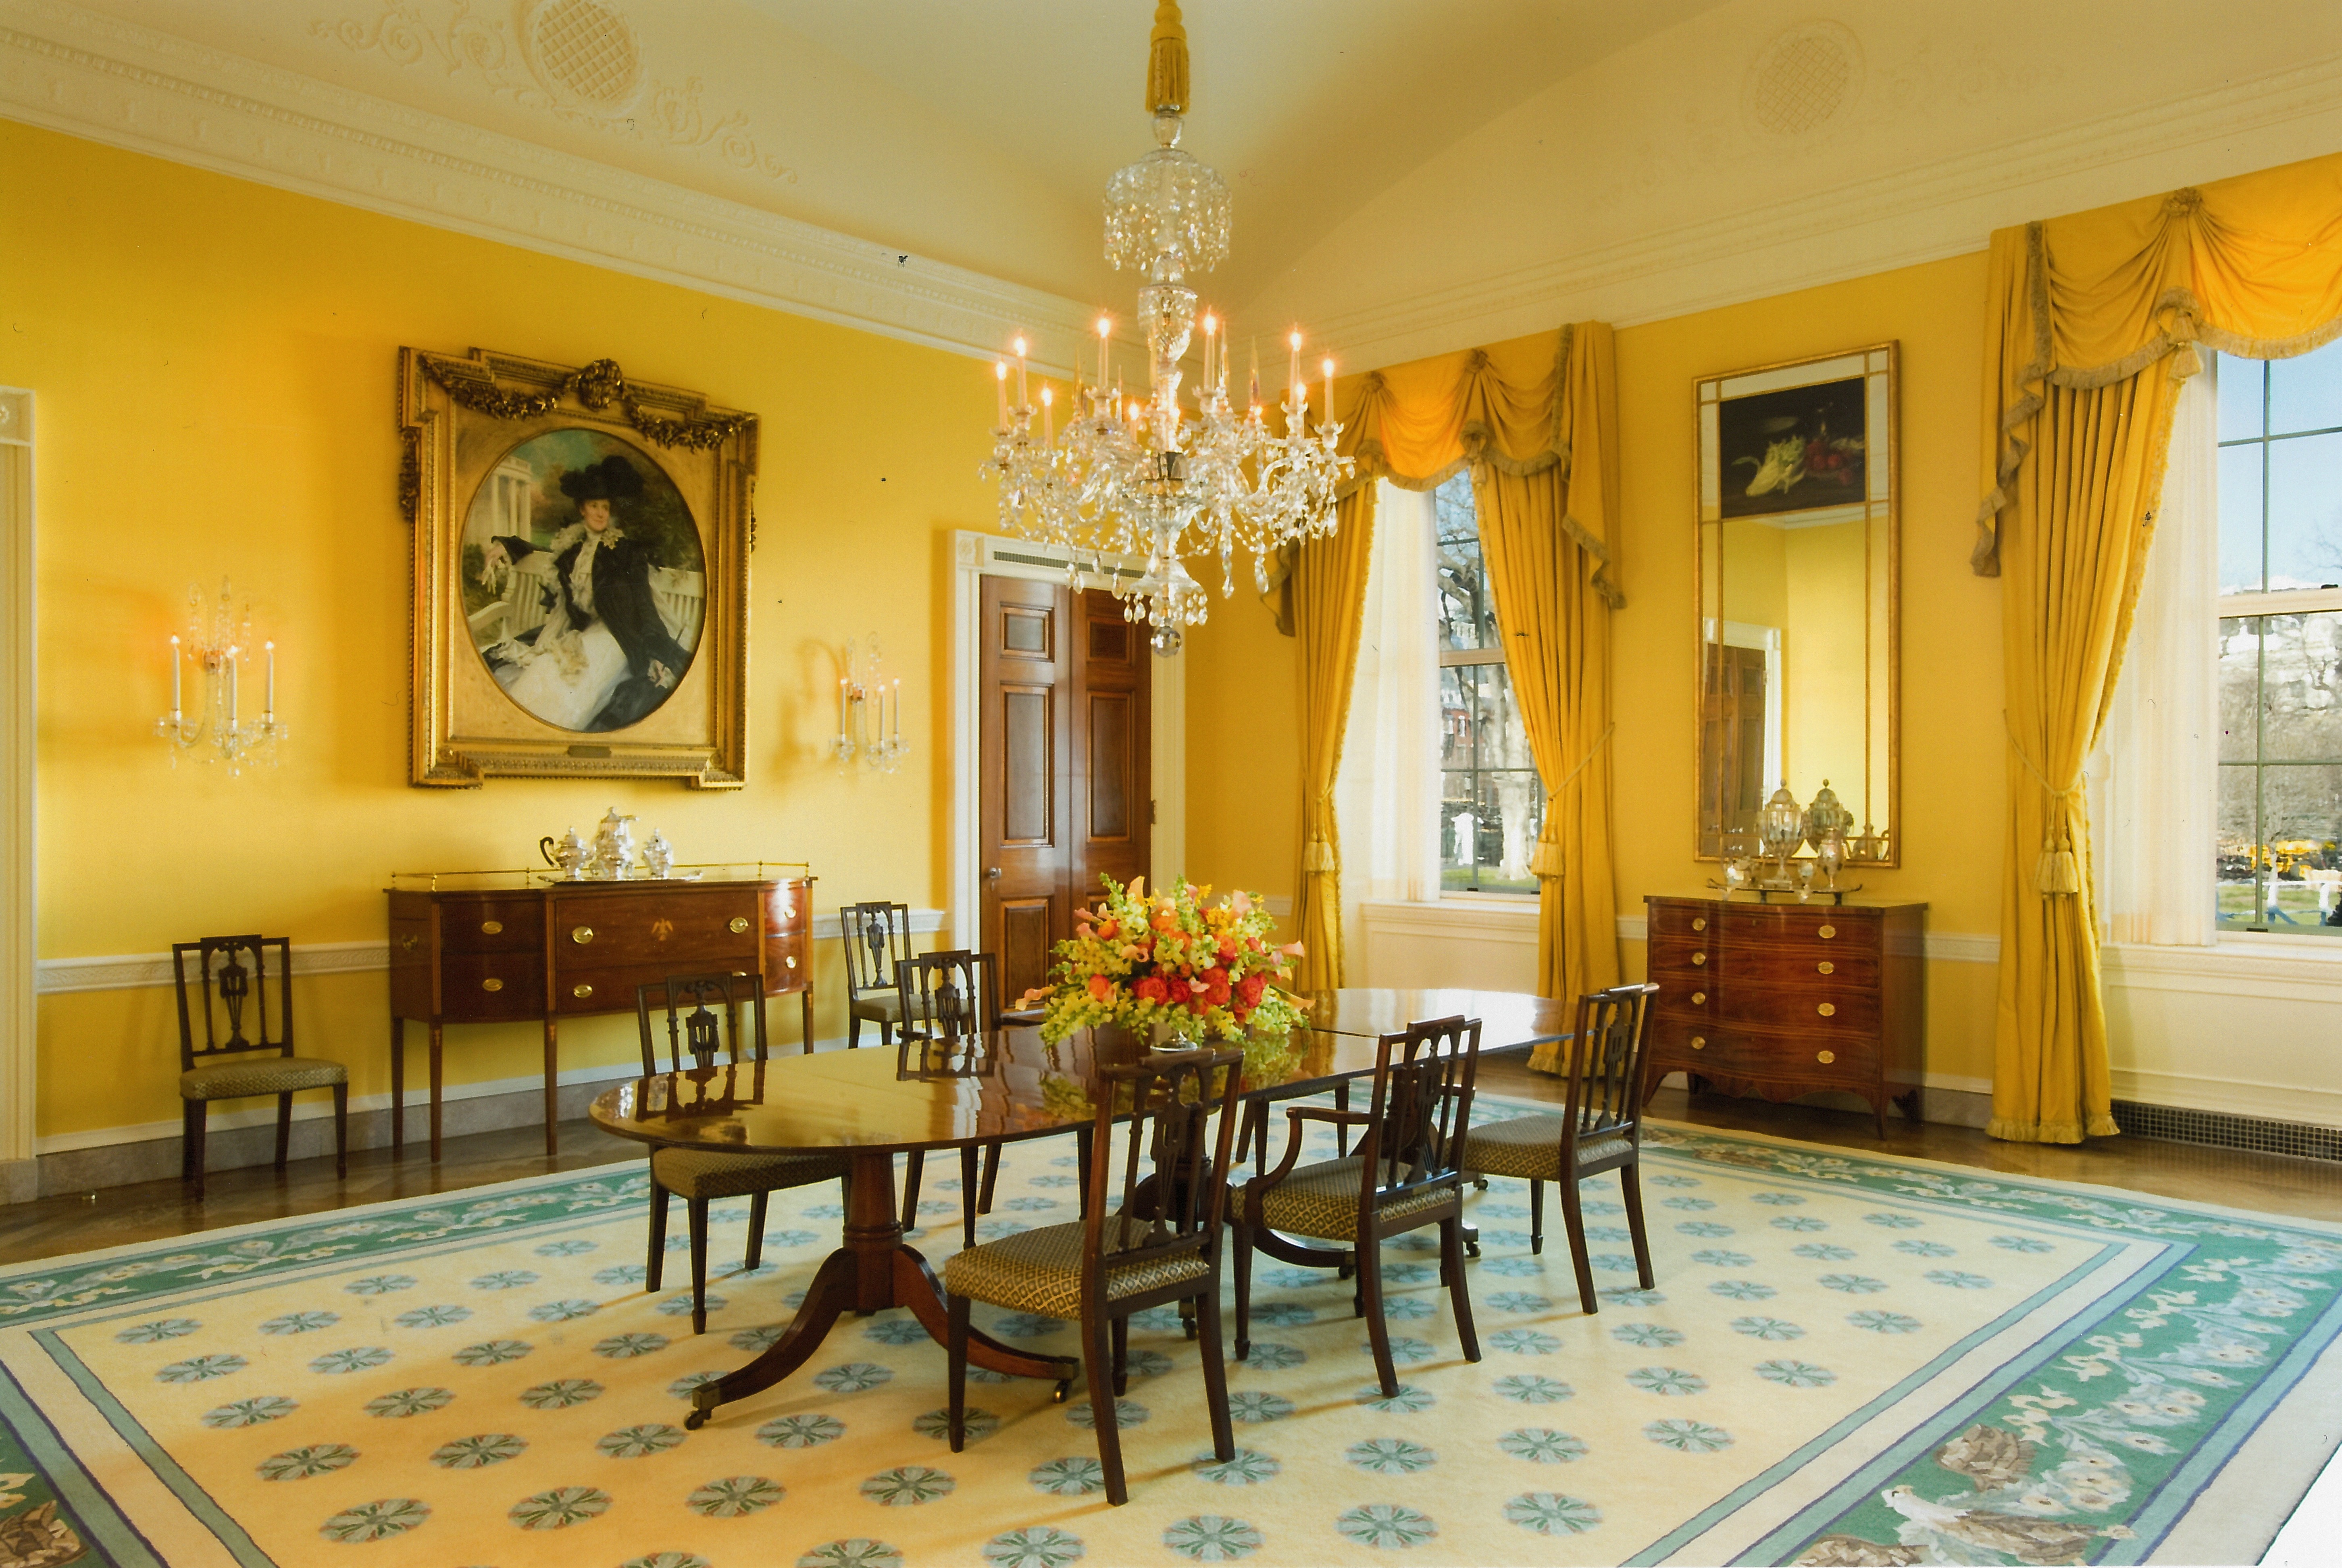 Dining Room In The White House